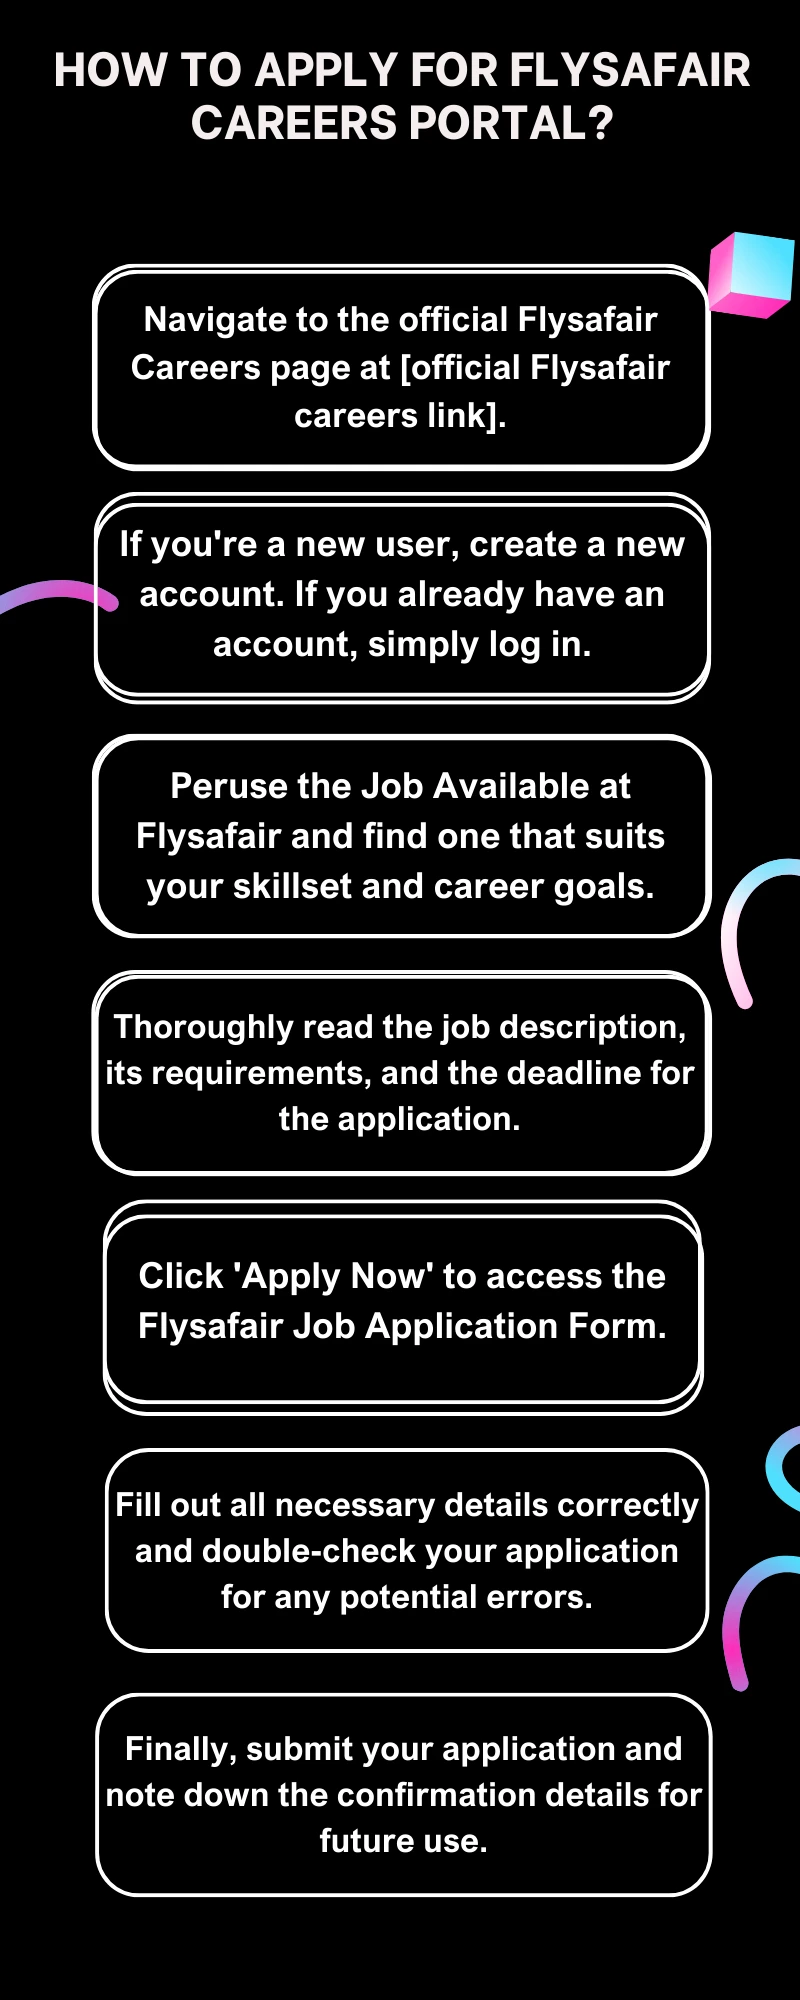 How To Apply for Flysafair Careers Portal?